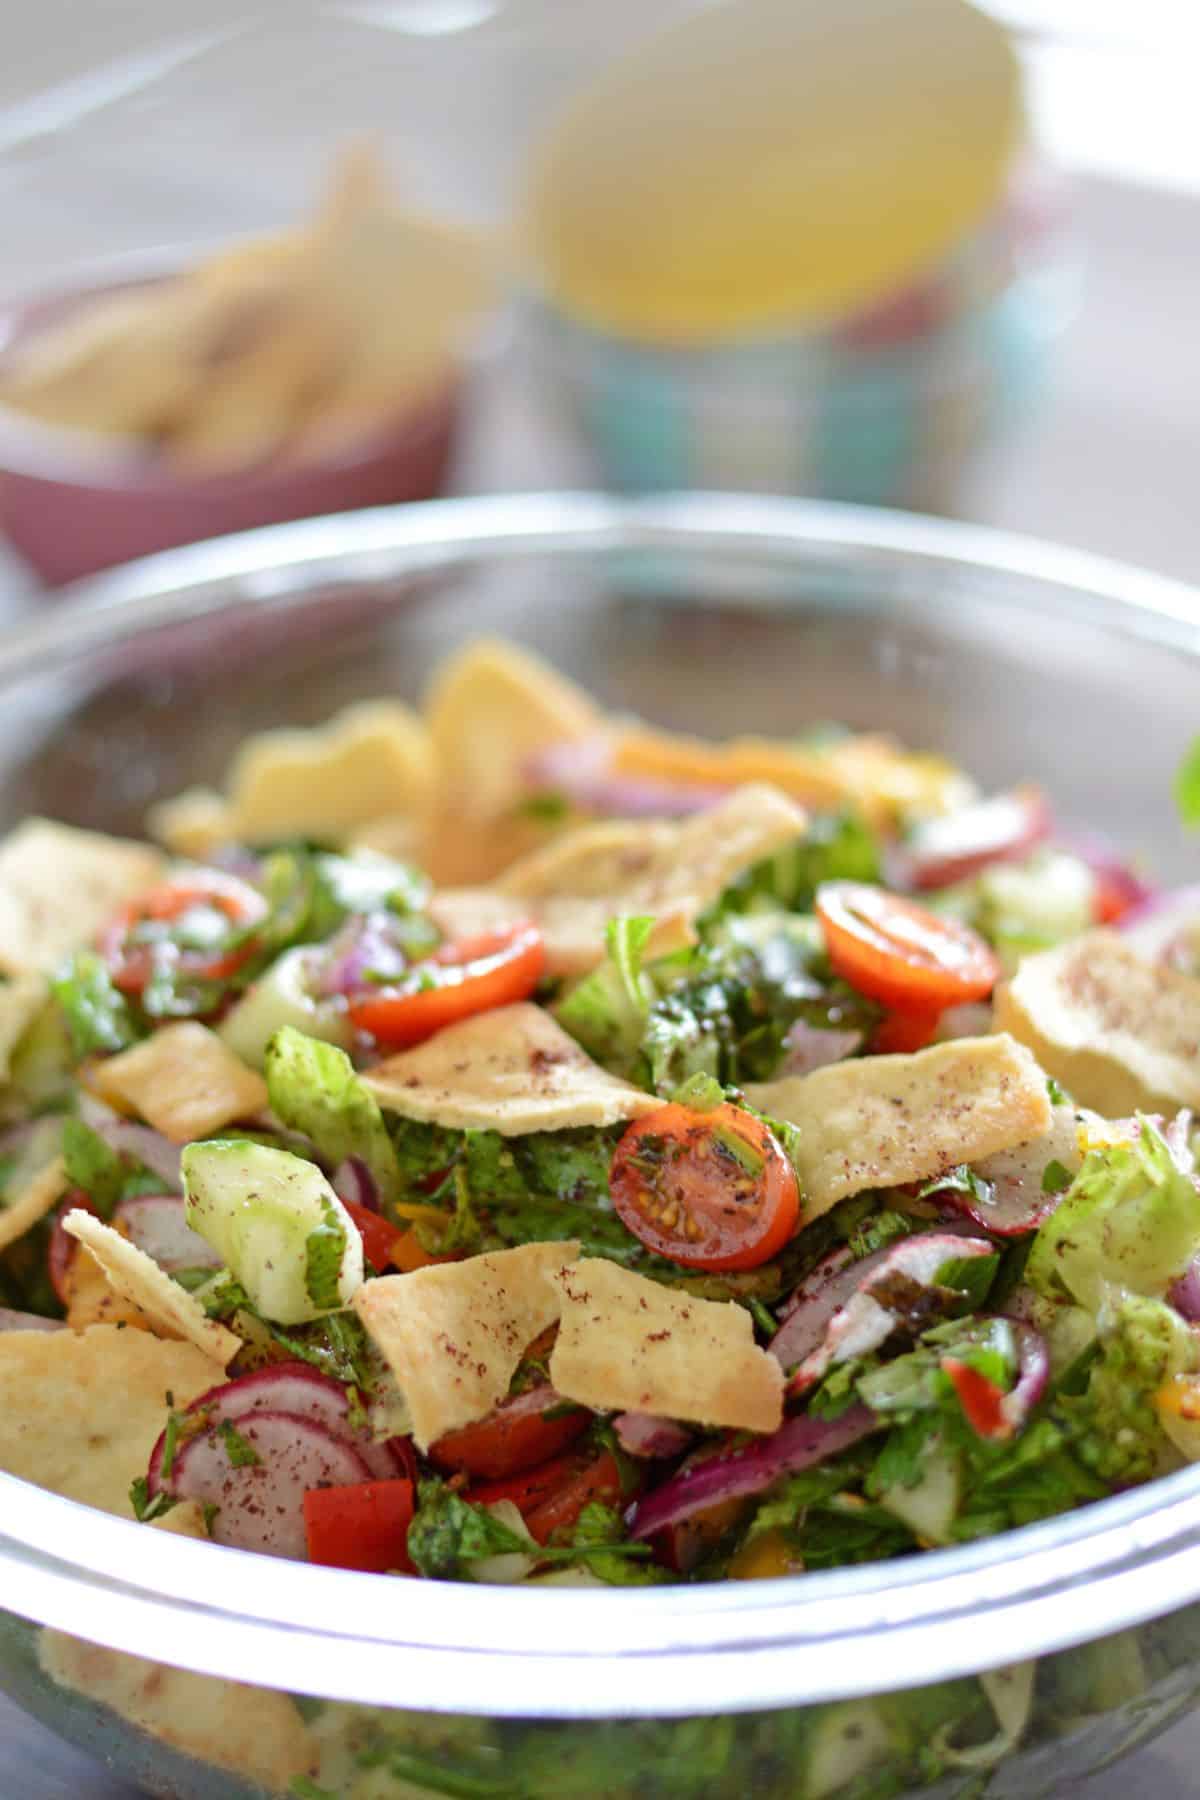 A glass bowl of fattoush salad with small bowls in the back.